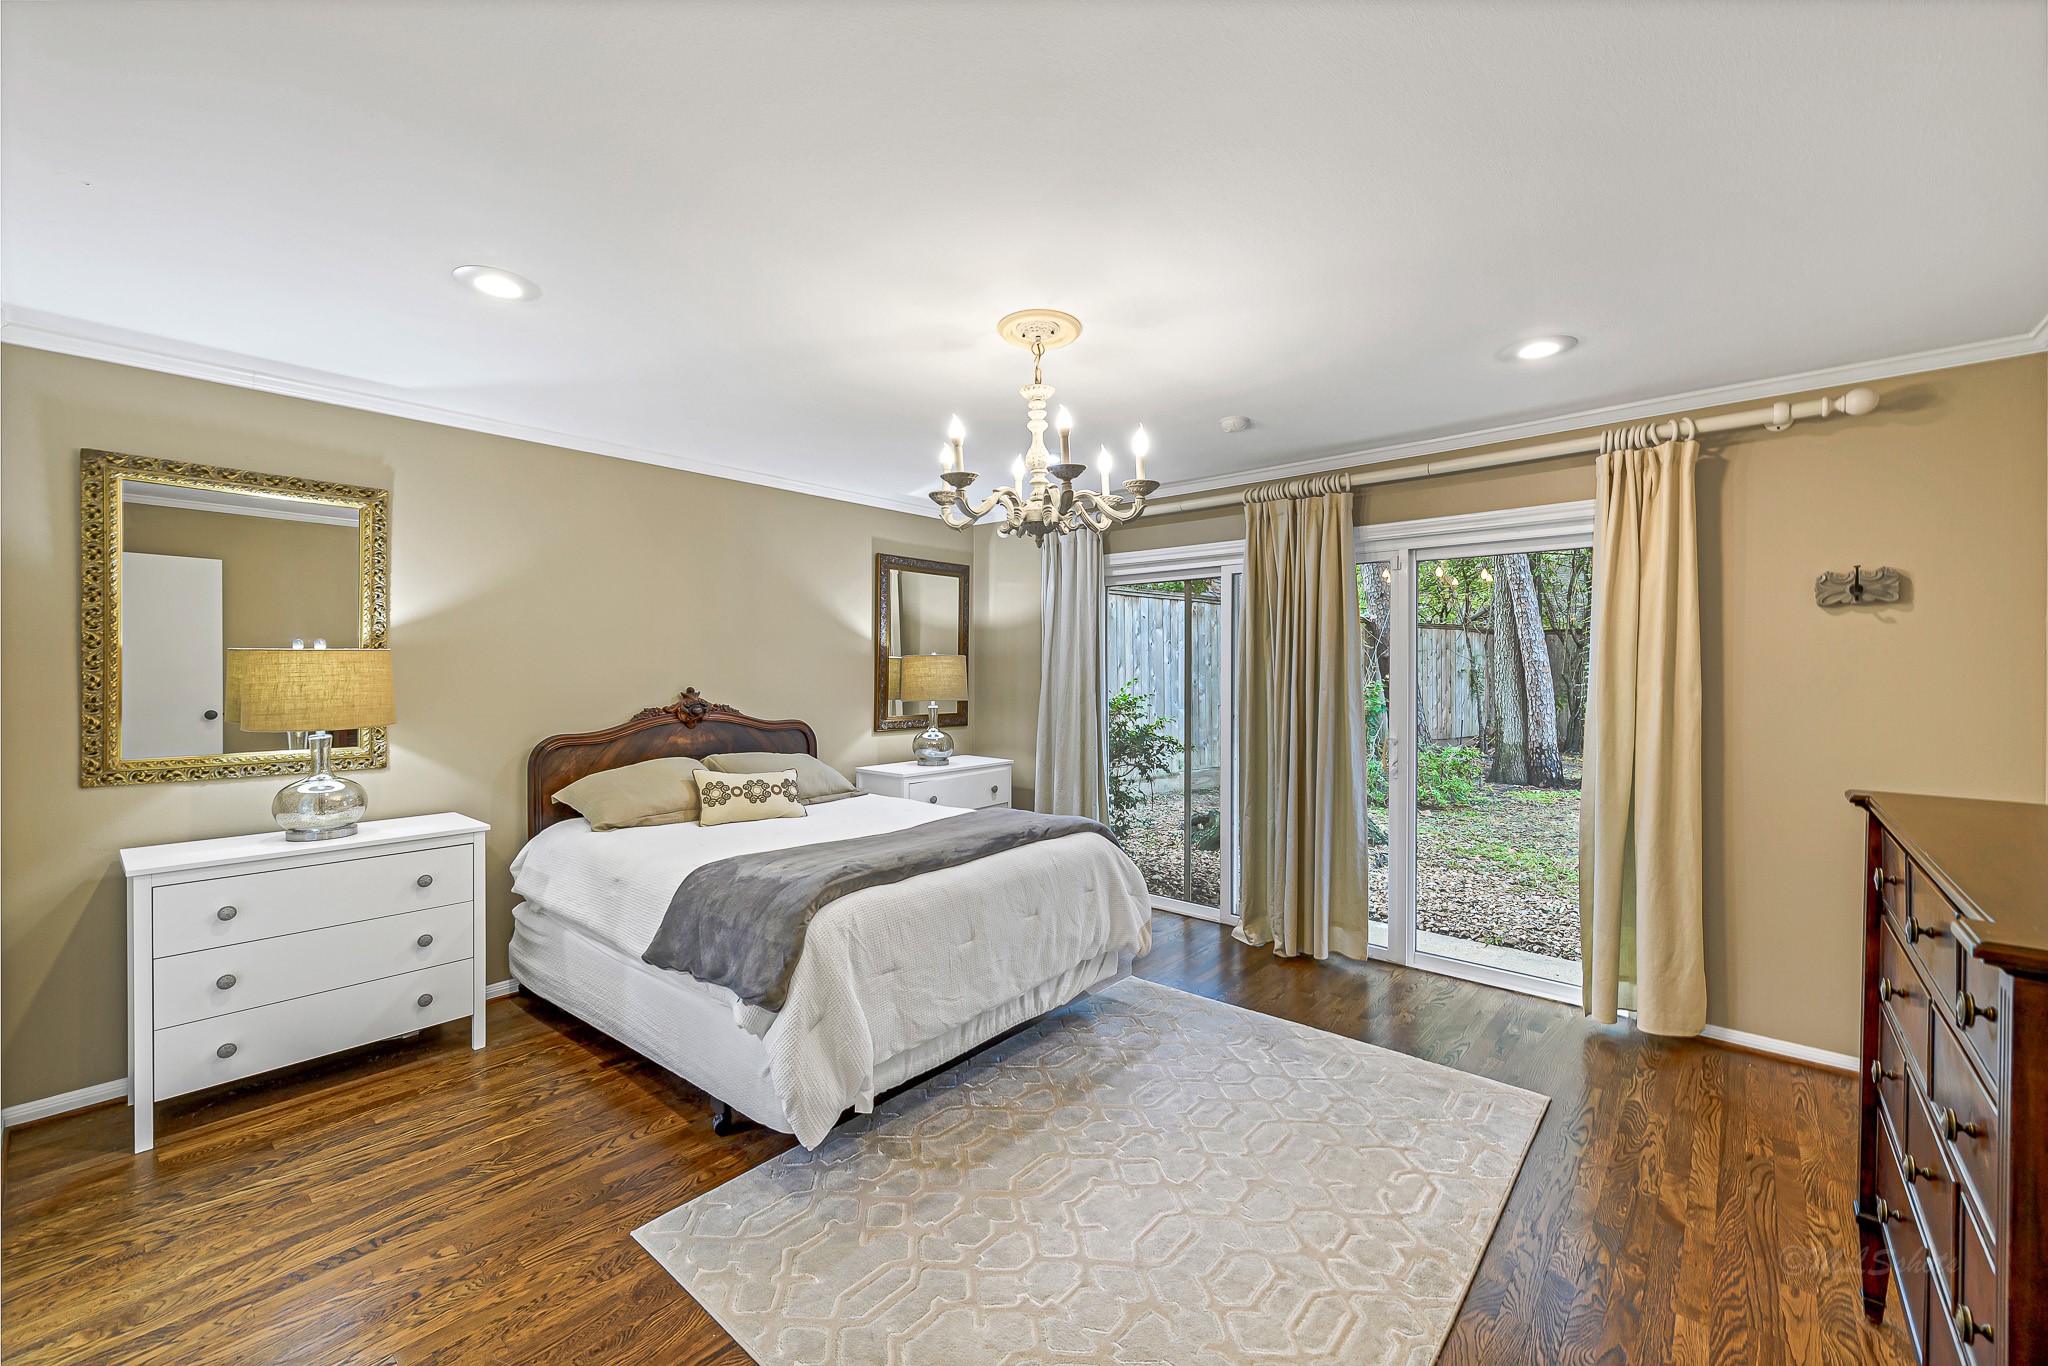 The Primary Bedroom embodies comfort and timeless elegance. The rich wood floors, warm color palette, crown molding, double closets, and private patio access create a haven of comfort in timeless elegance.